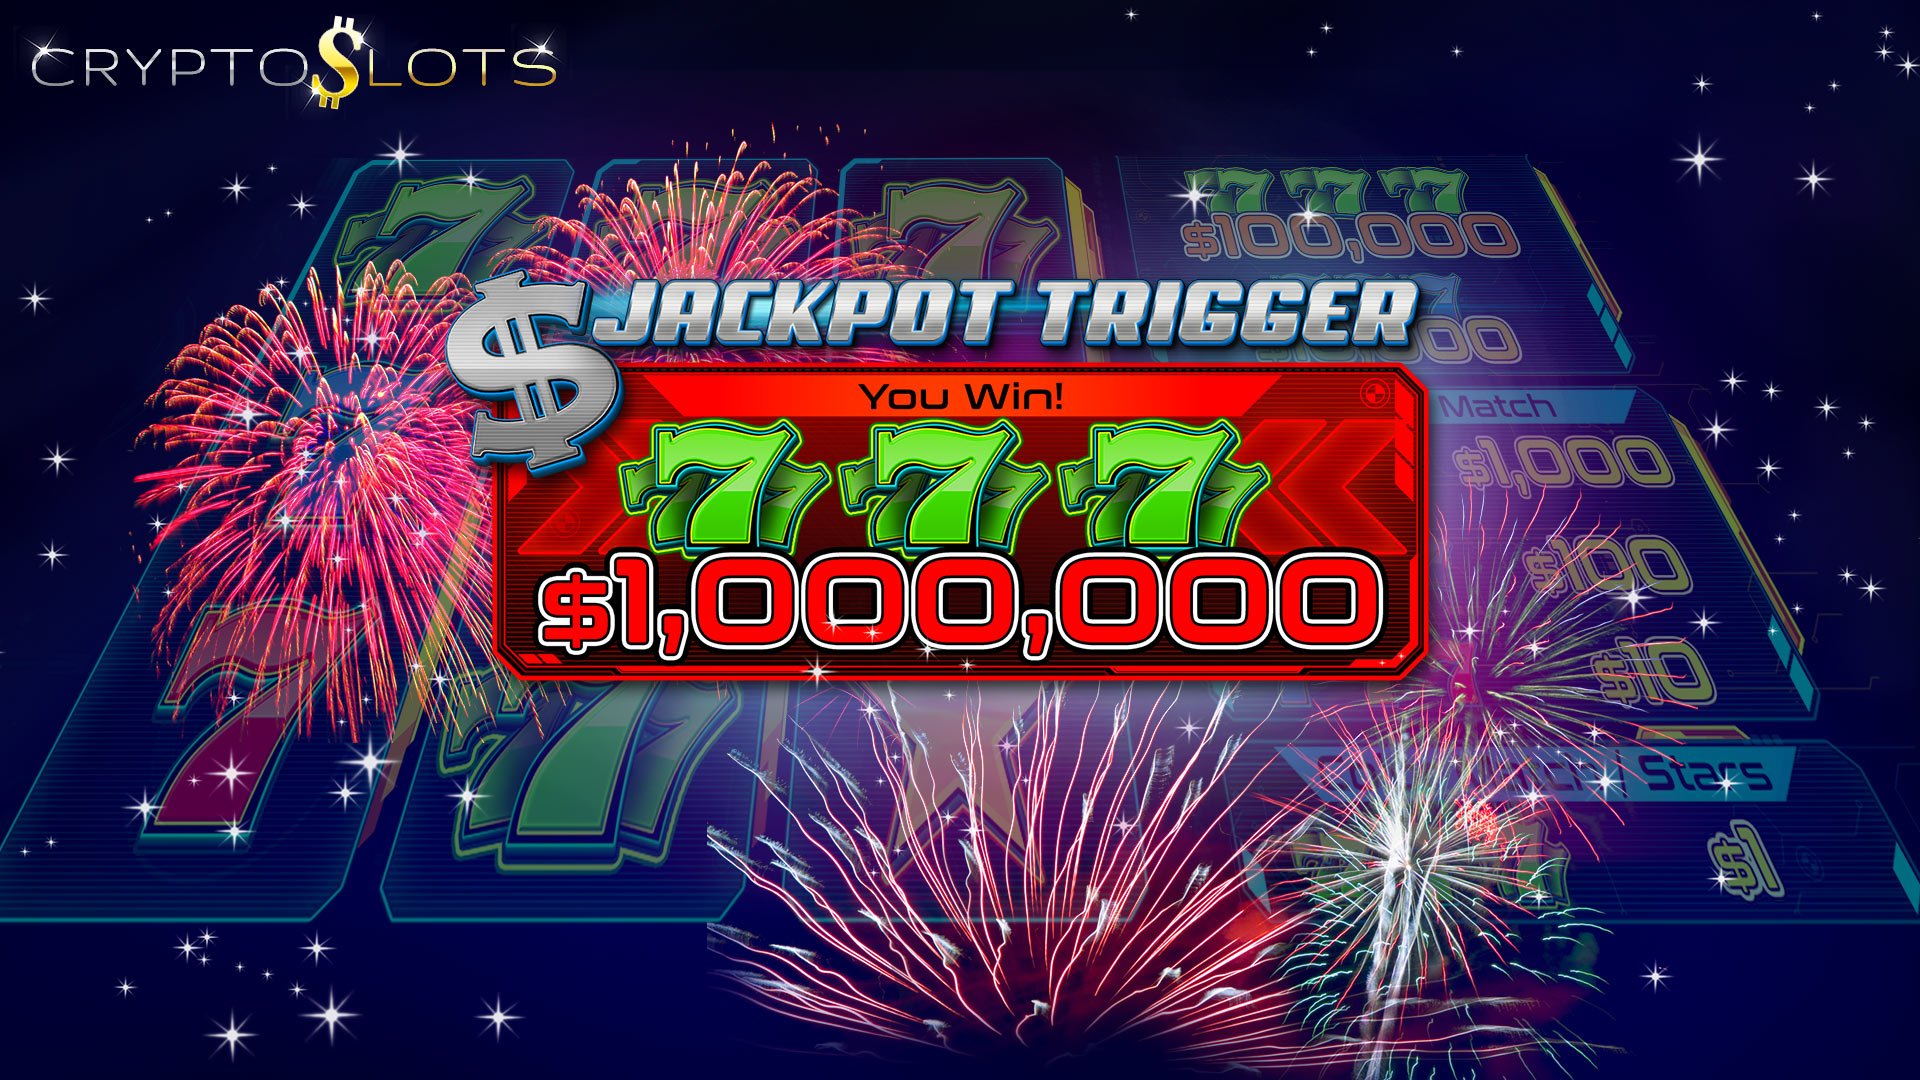 Why CryptoSlots are Offering Free Spins for their $1,000,000 Slot